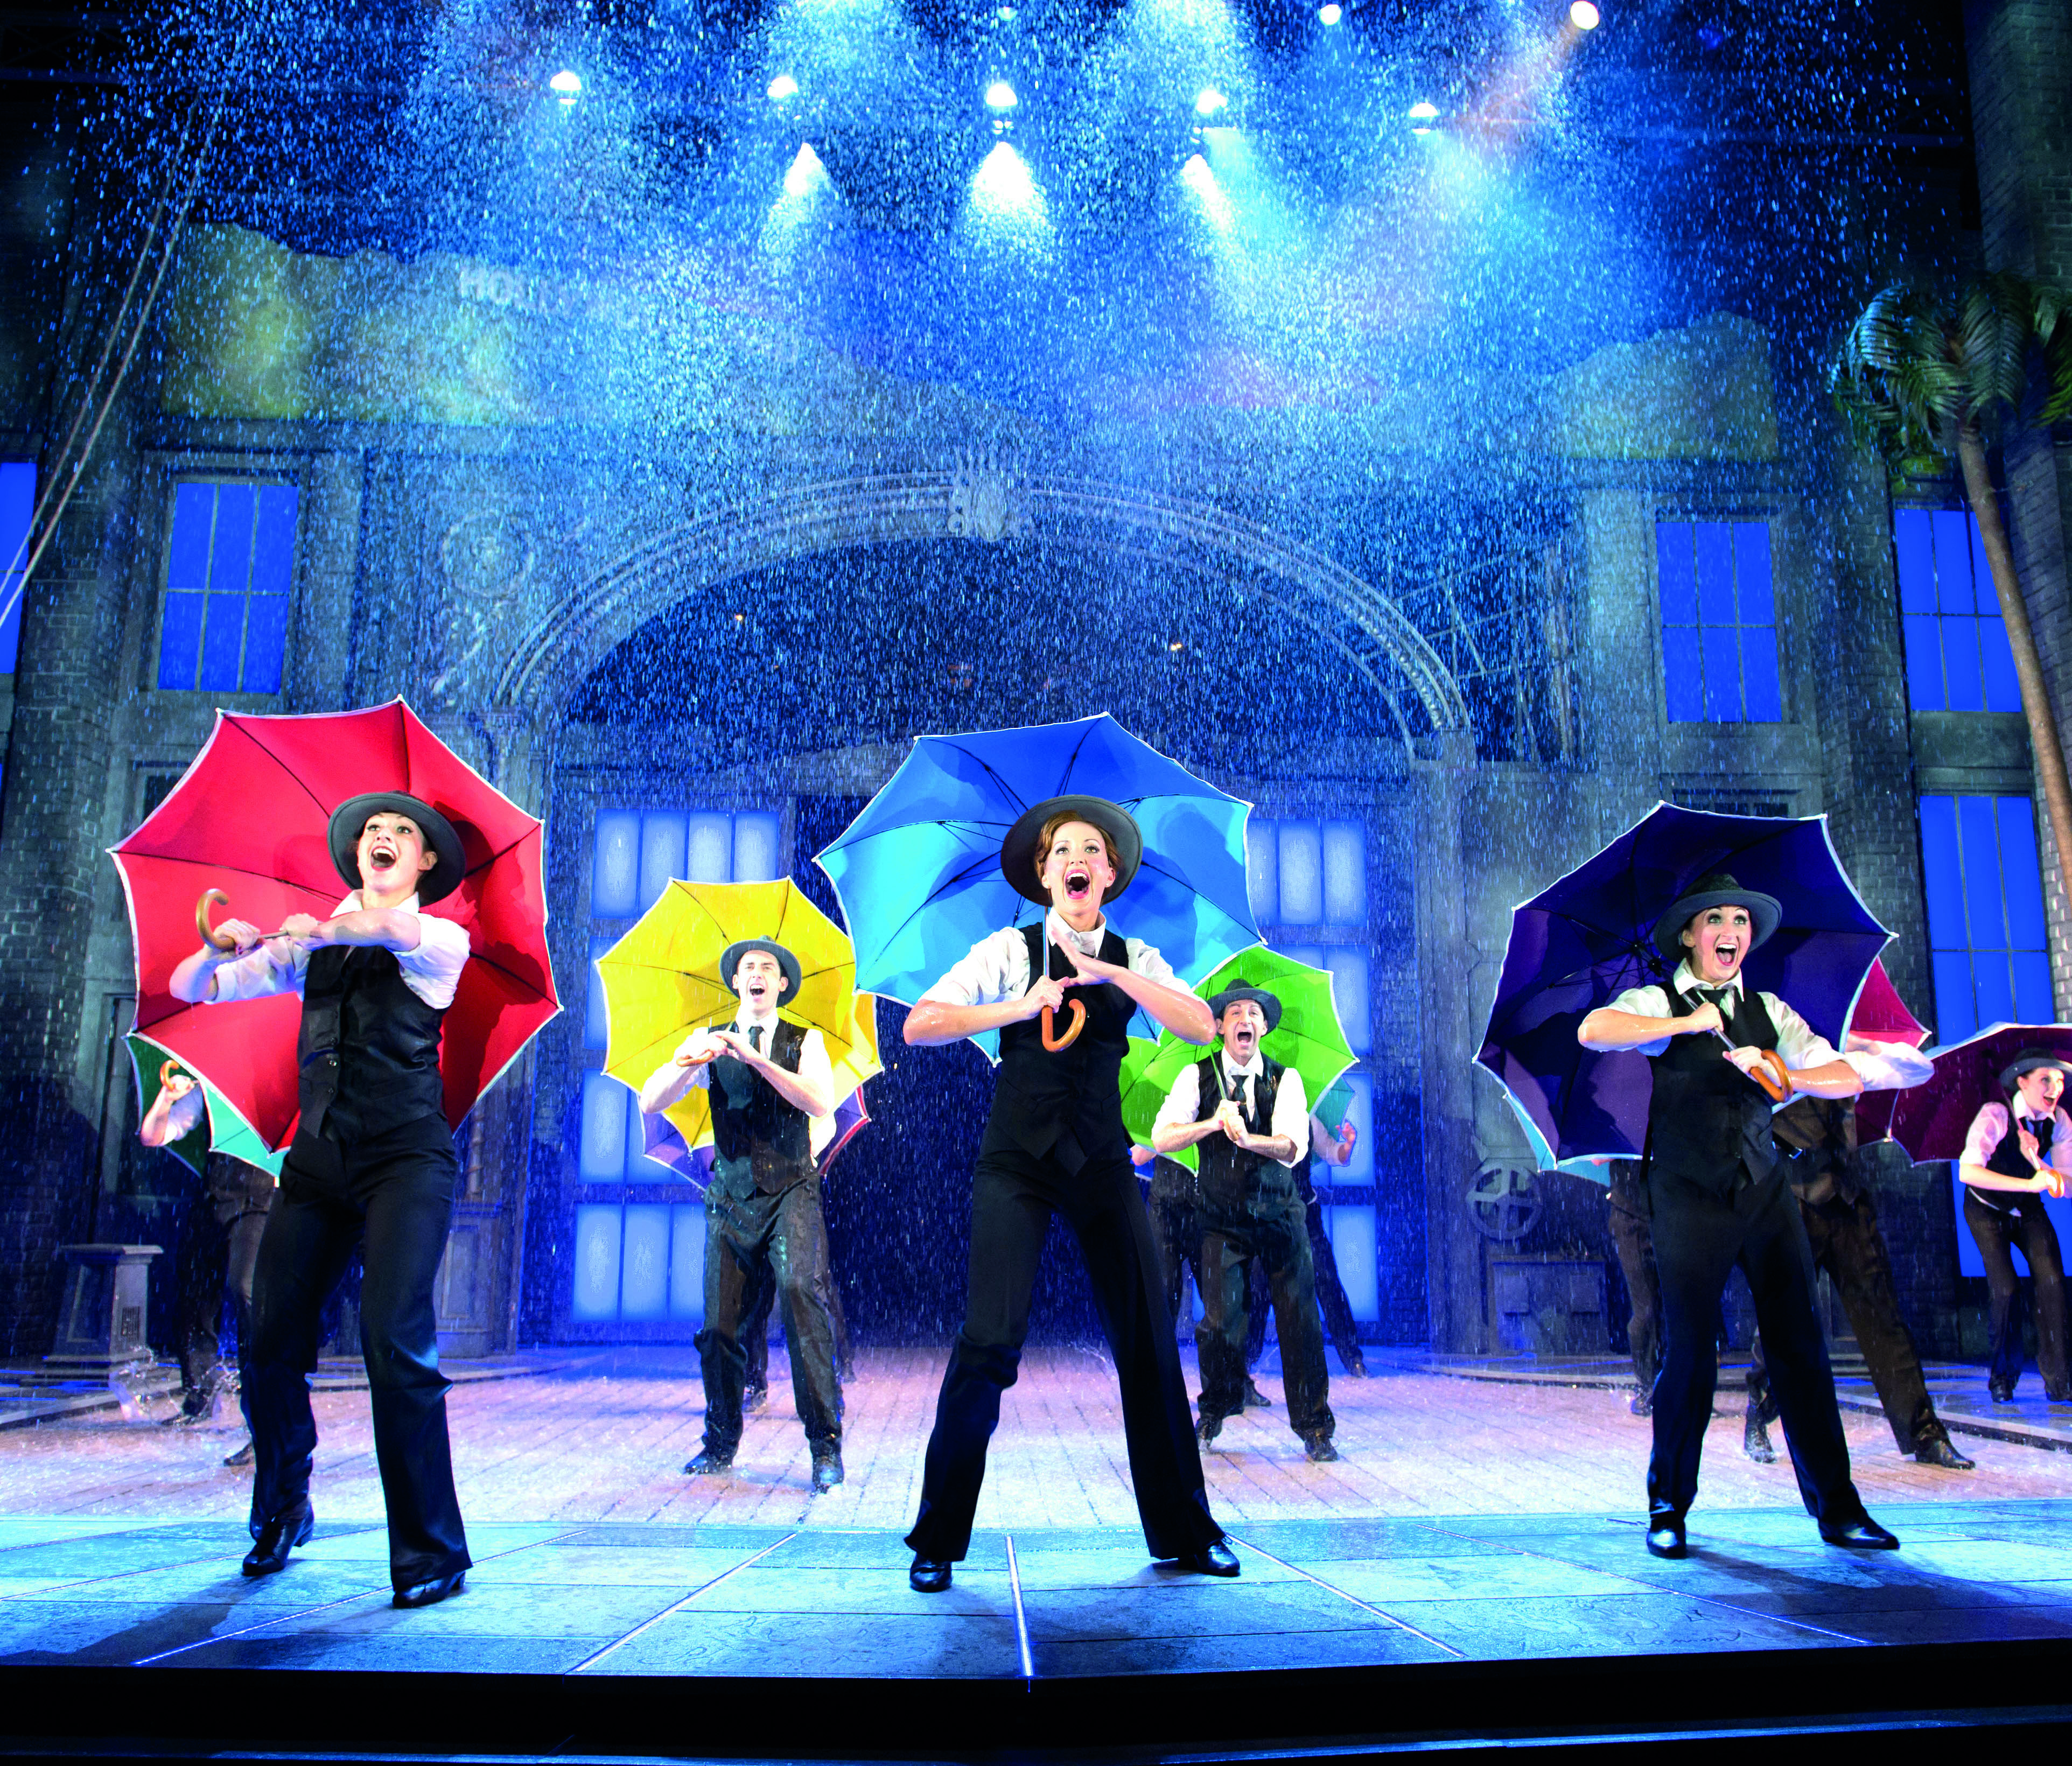 The staging of "Singin' in the Rain" is a marvel of effortless scene changes.